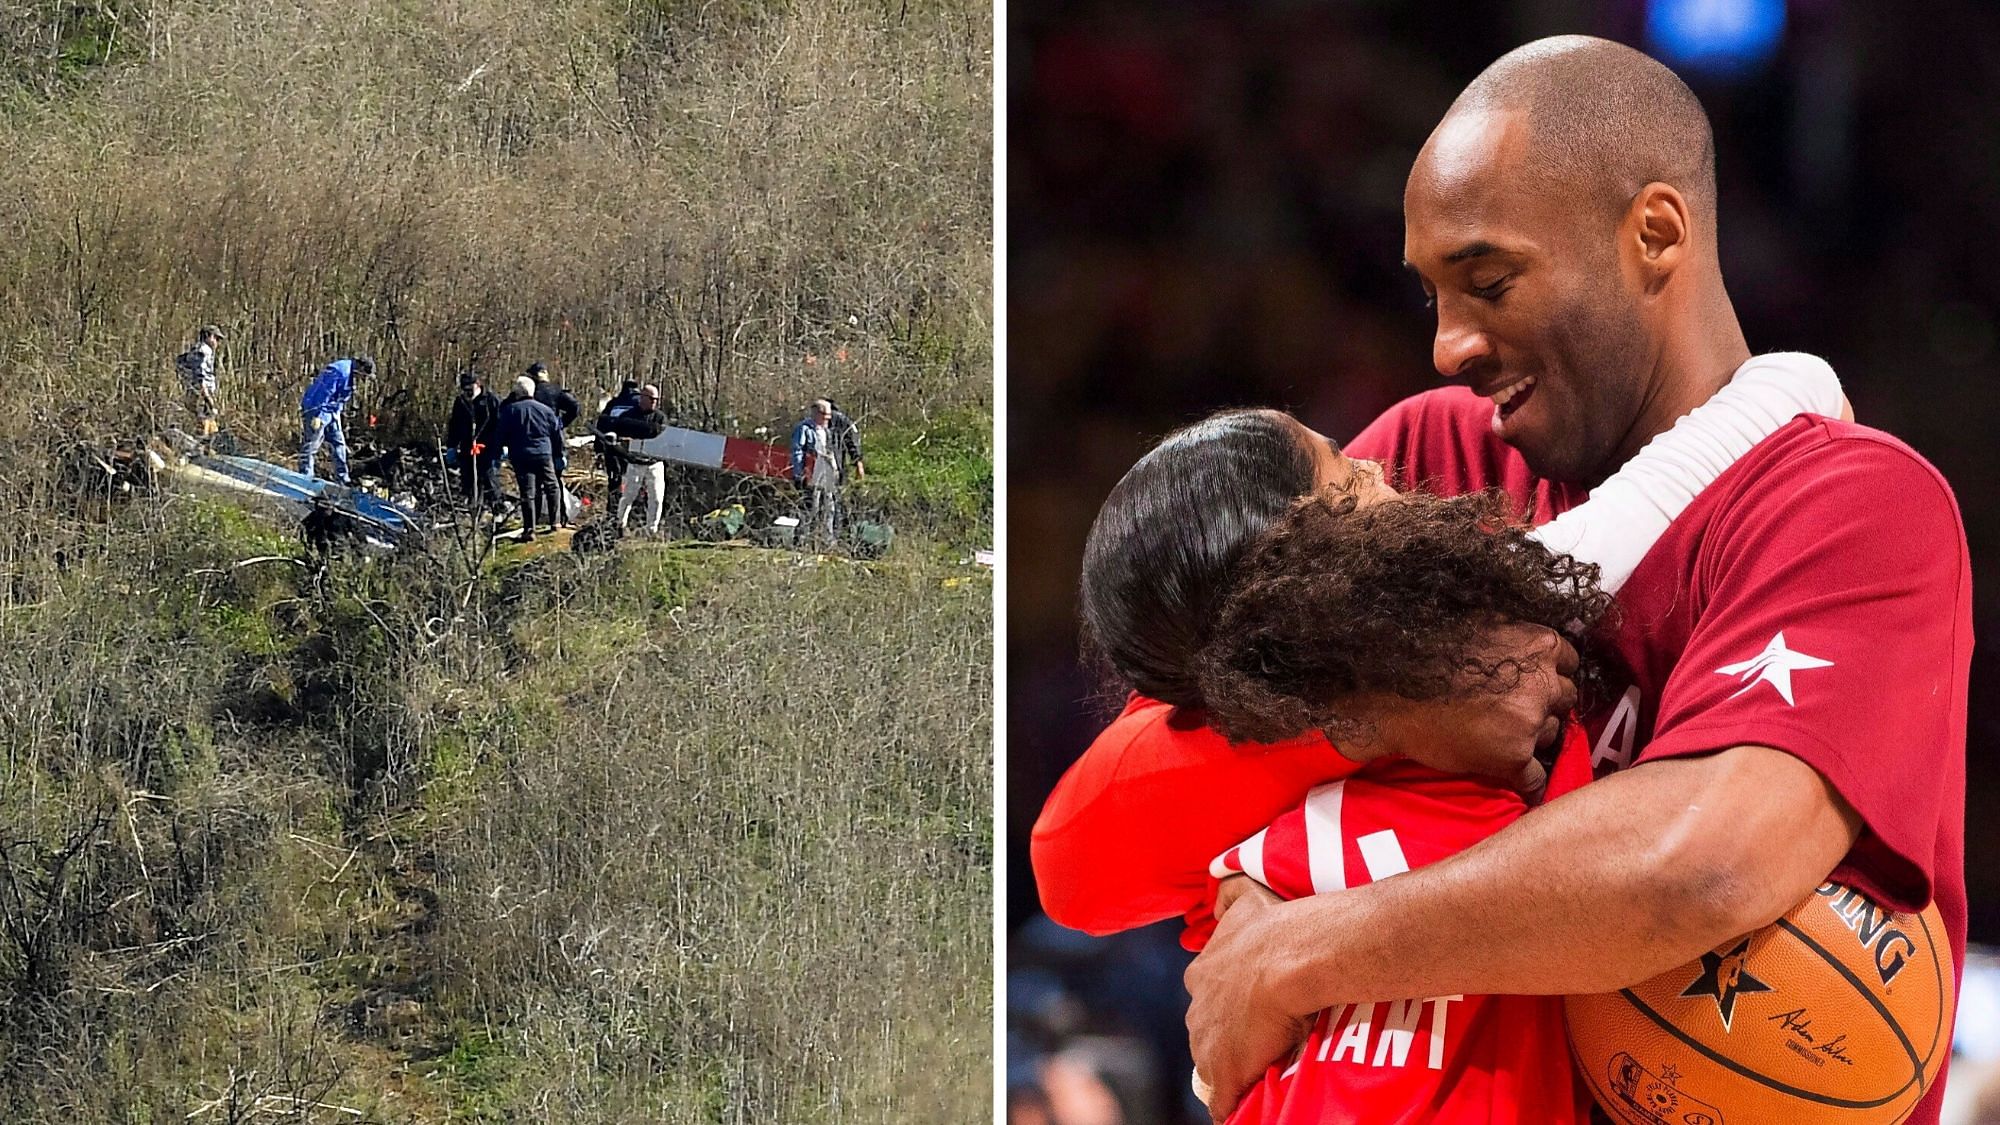 Kobe Bryant was traveling Sunday with his 13-year-old daughter Gianna and seven other passengers and crew.